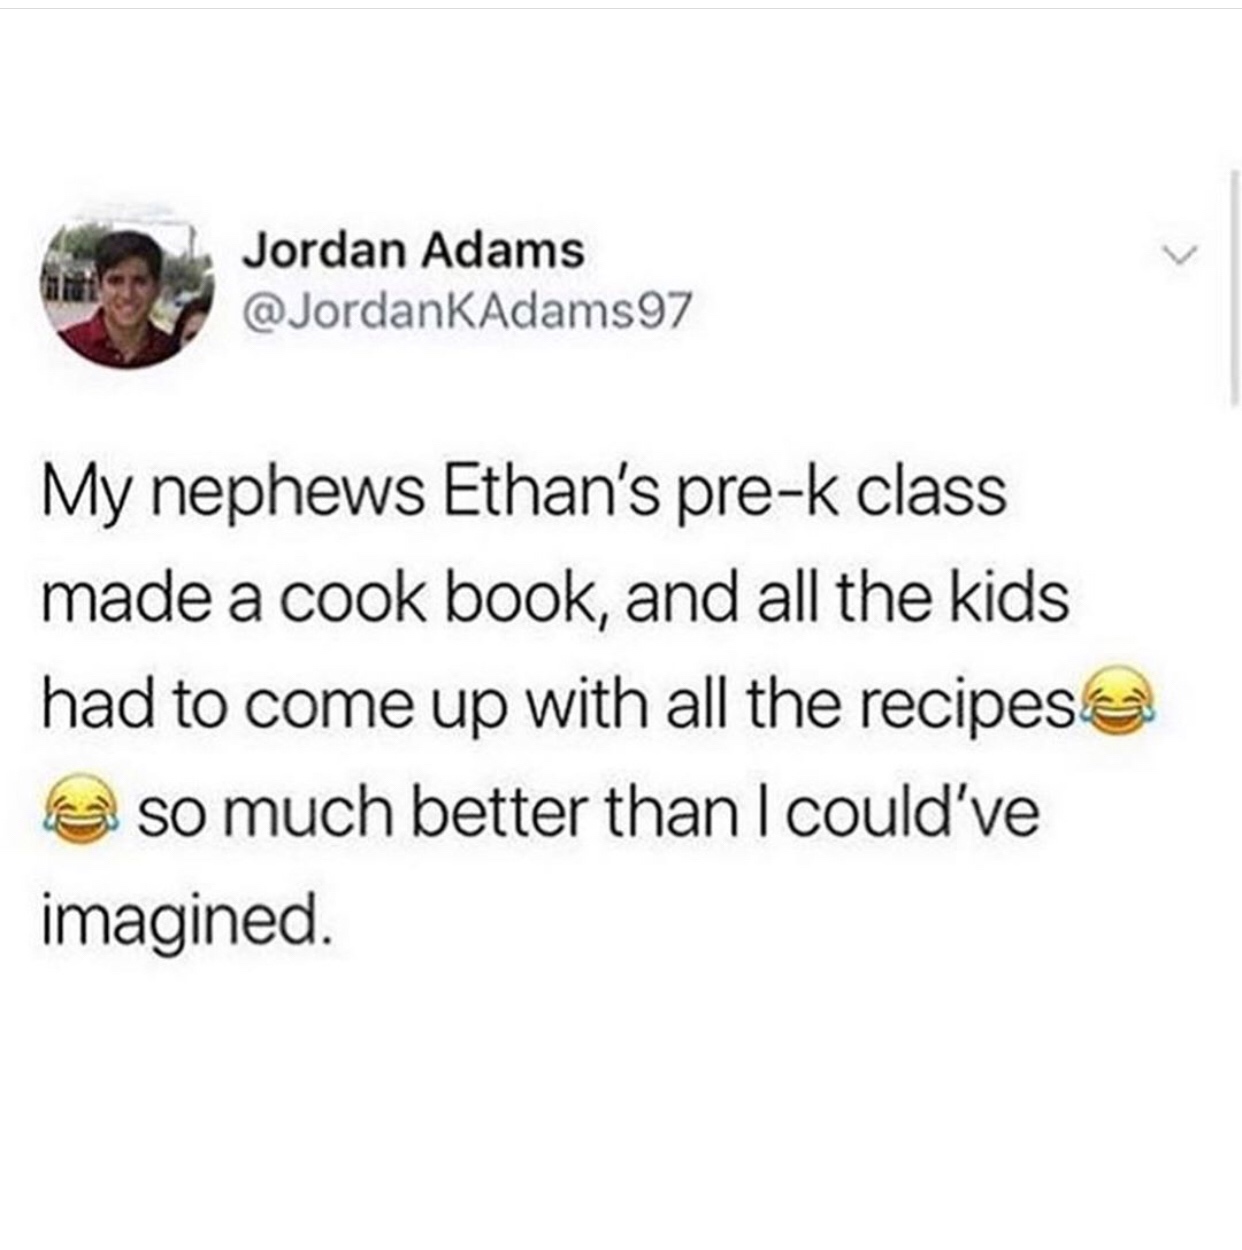 Jordan Adams My nephews Ethan's prek class made a cook book, and all the kids had to come up with all the recipes so much better than I could've imagined